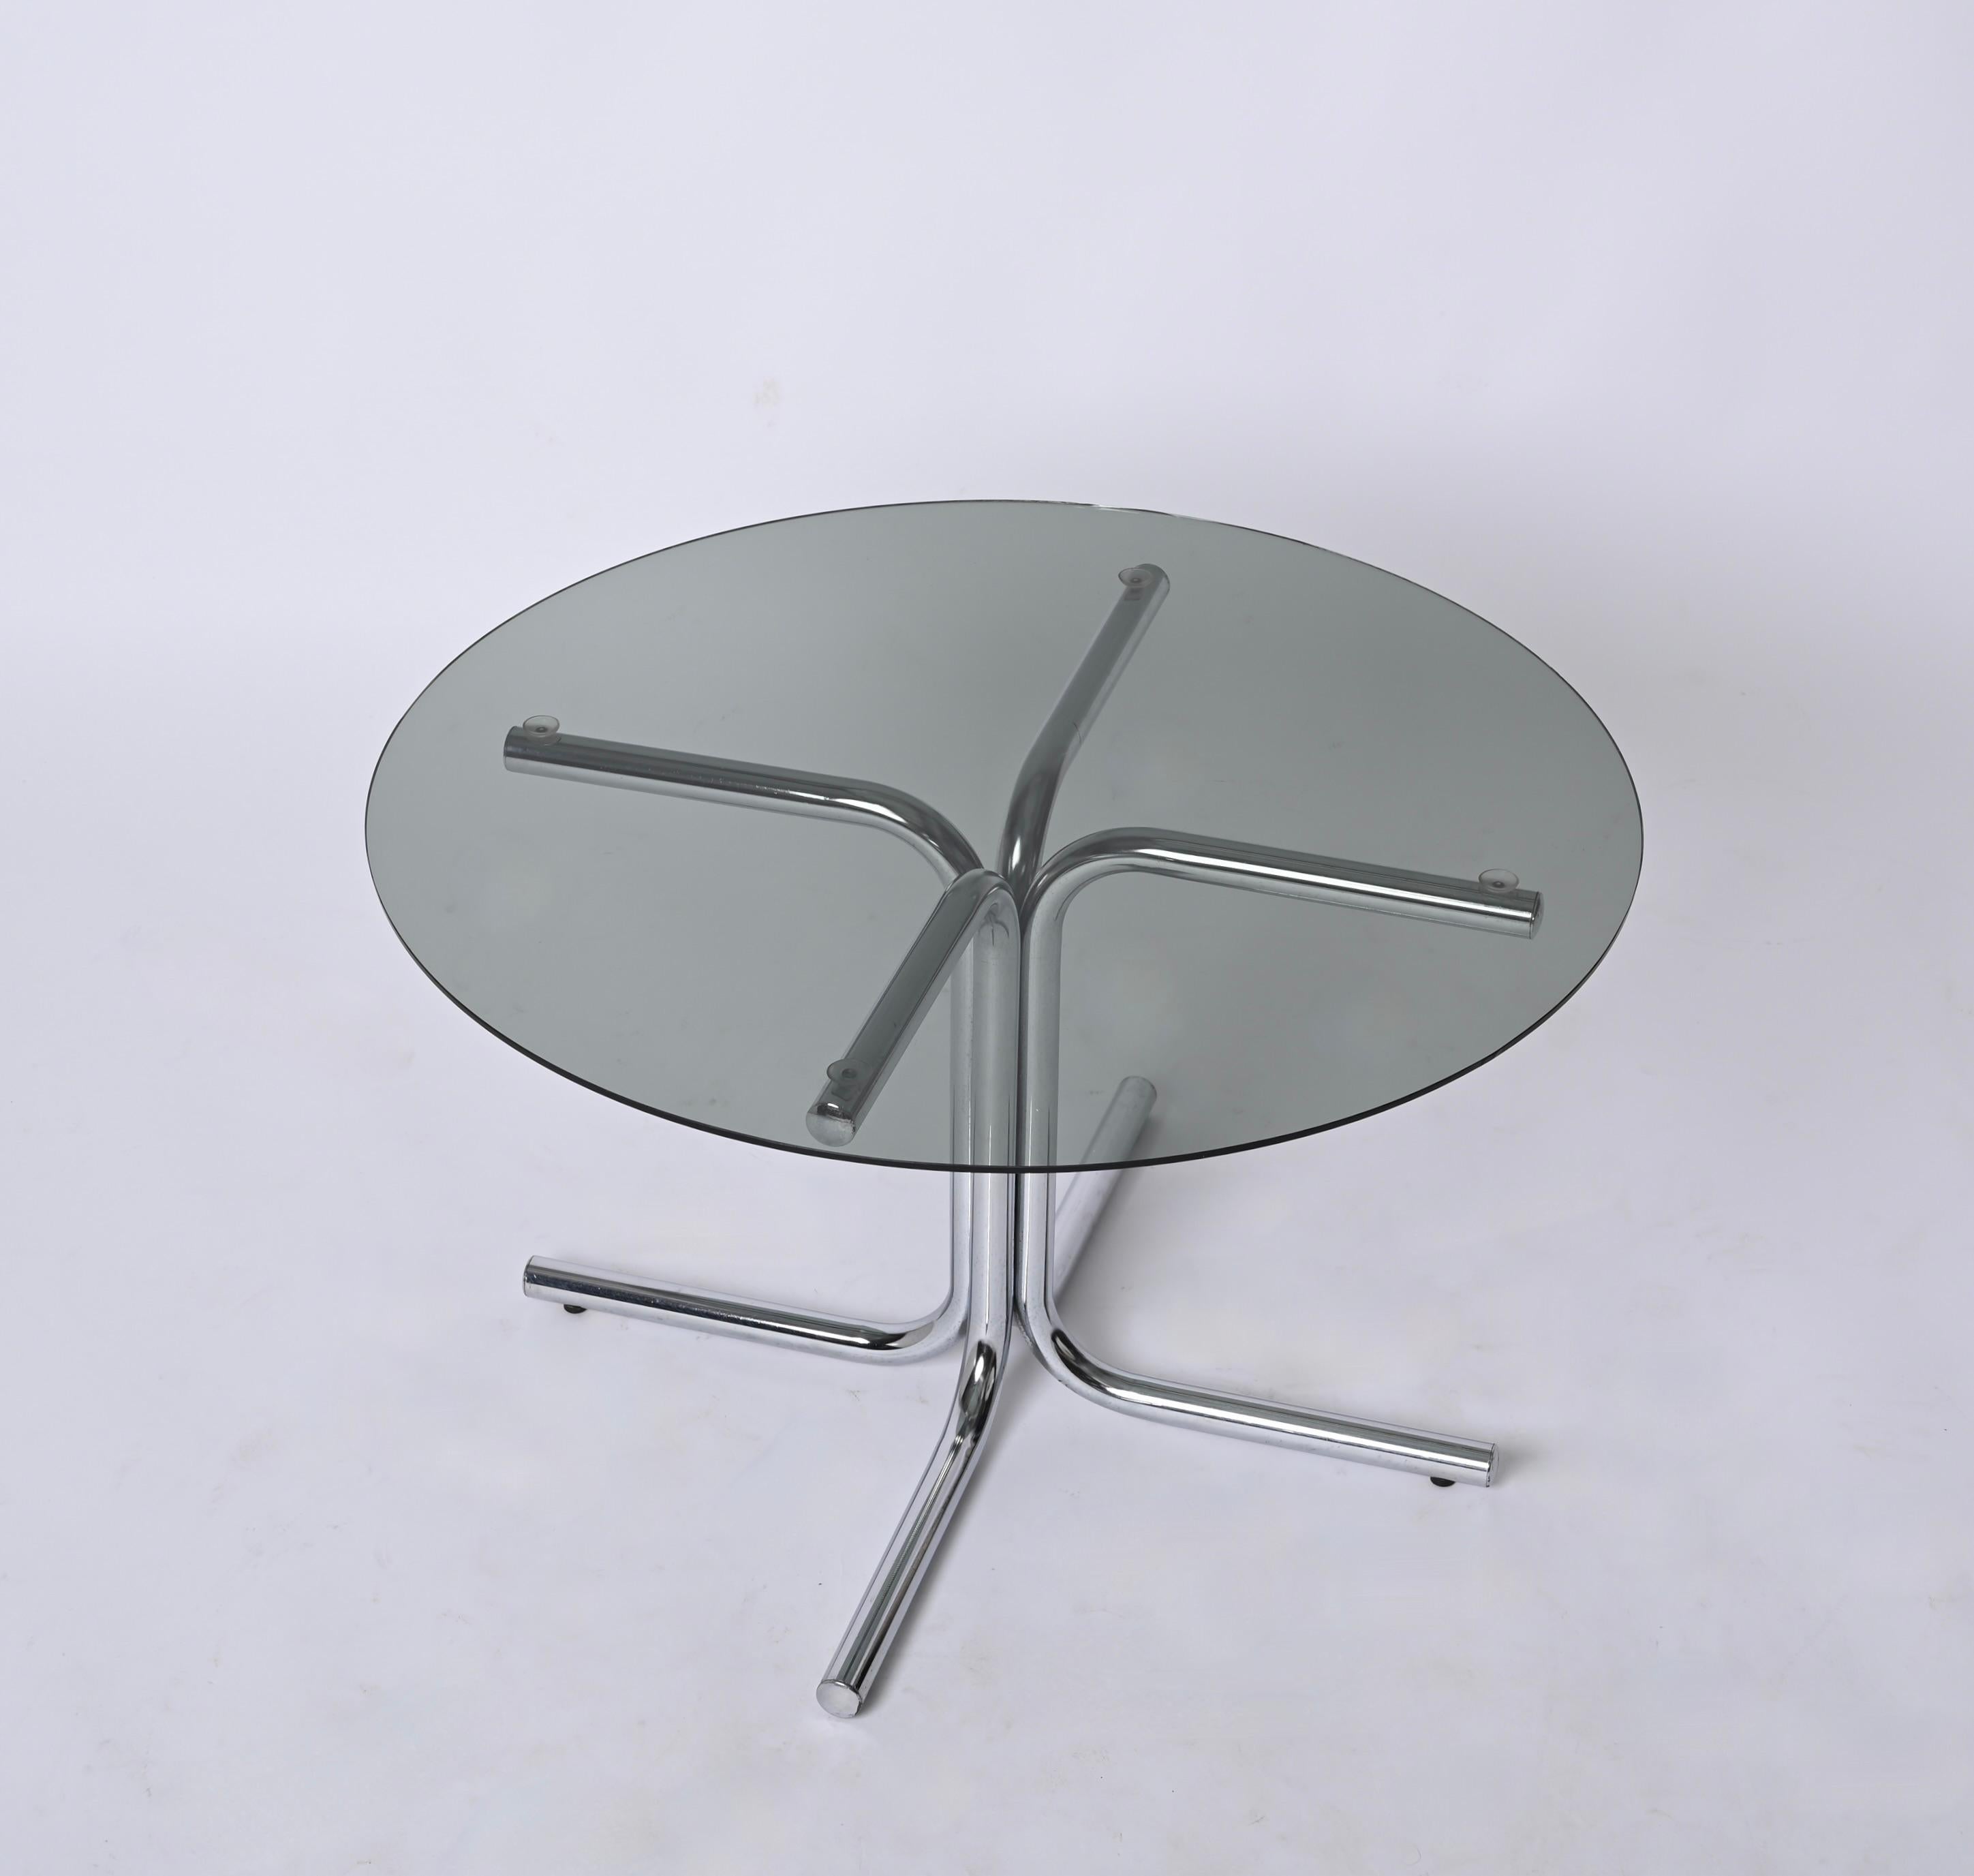 Chrome and Smoked Glass Round Italian Coffee Table, Giotto Stoppino Style, 1970s For Sale 7